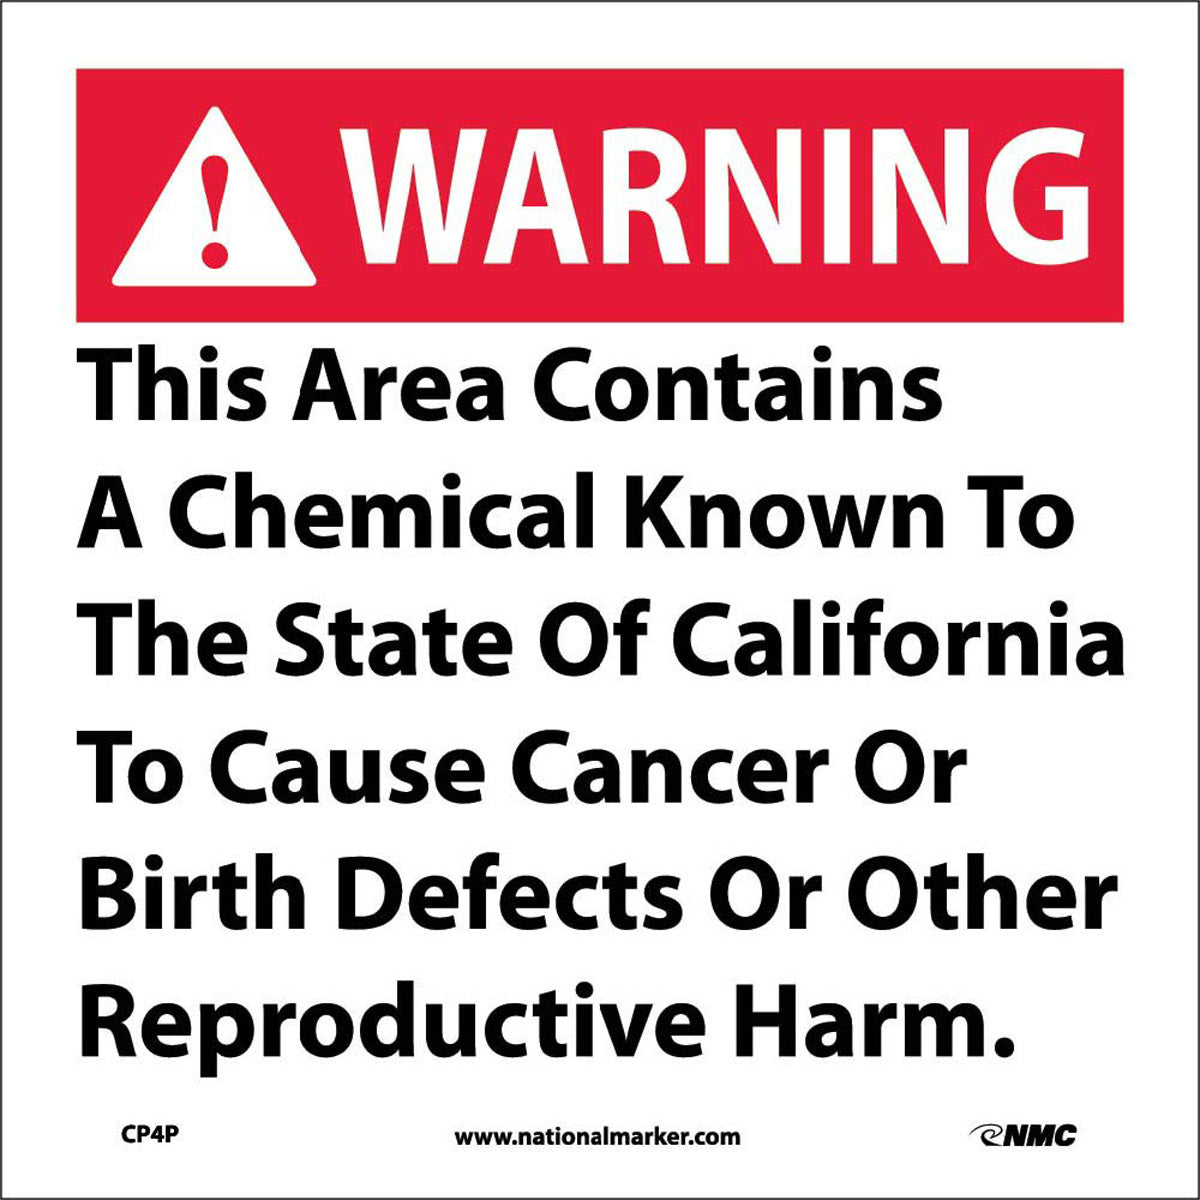 NM 10" X 10" White .0045" Pressure Sensitive Vinyl CA Prop 65 "WARNING THIS AREA CONTAINS A CHEMICAL KNOWN TO THE STATE OF CALIFORNIA TO CAUSE CANCER OR BIRTH DEFECTS OR OTHER REPRODUCTIVE HARM."